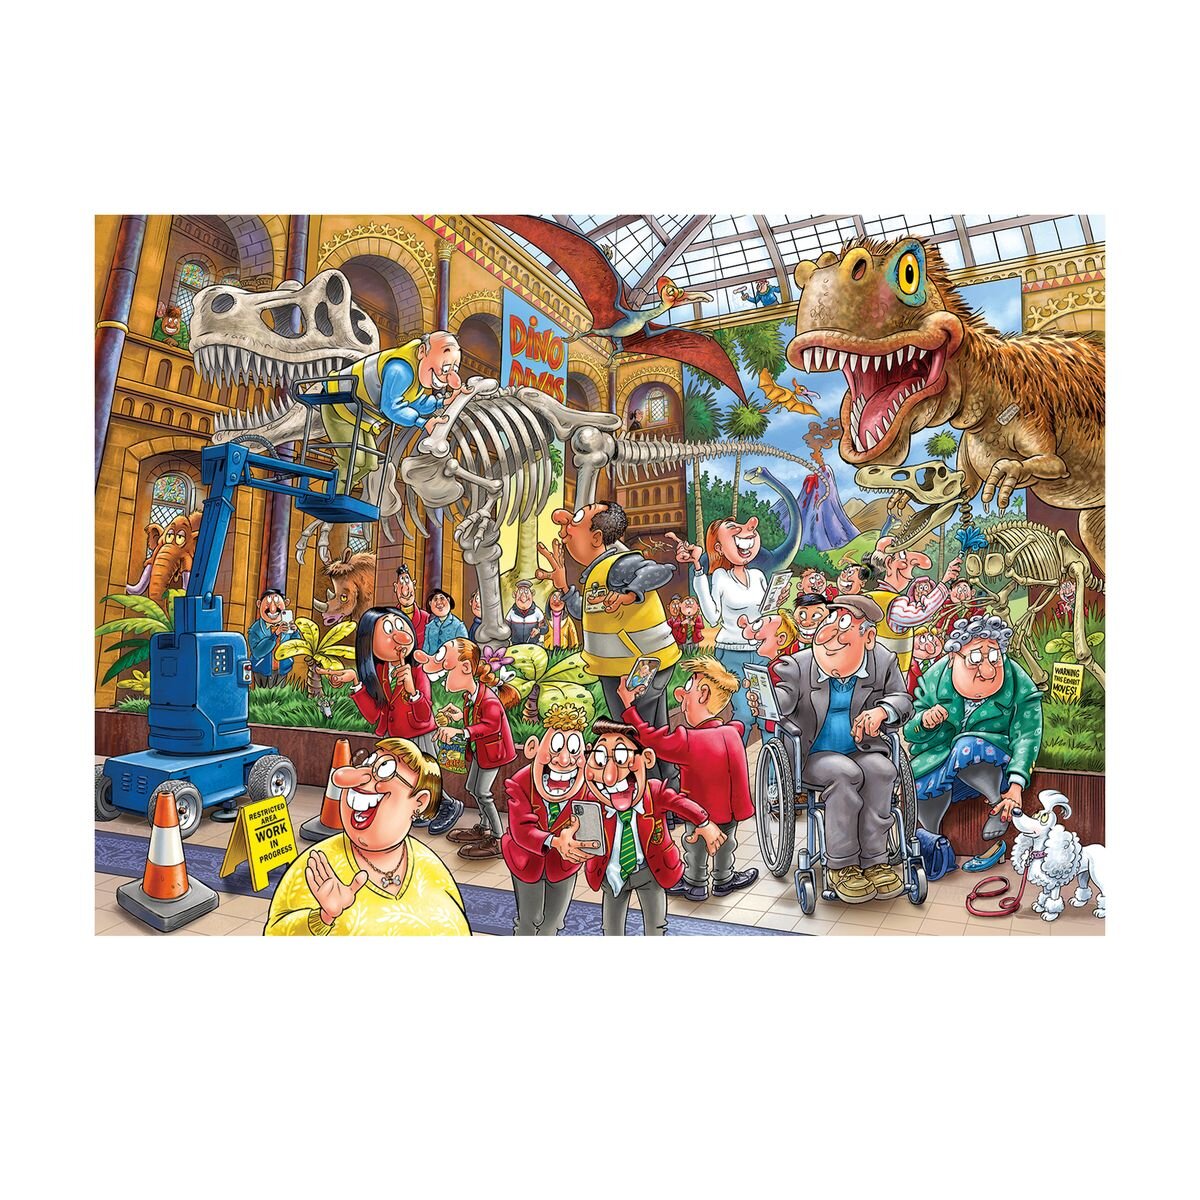 Jumbo Spiele Puzzle - Wasgij Mystery 24: Blight at the Museum! 1000 Teile